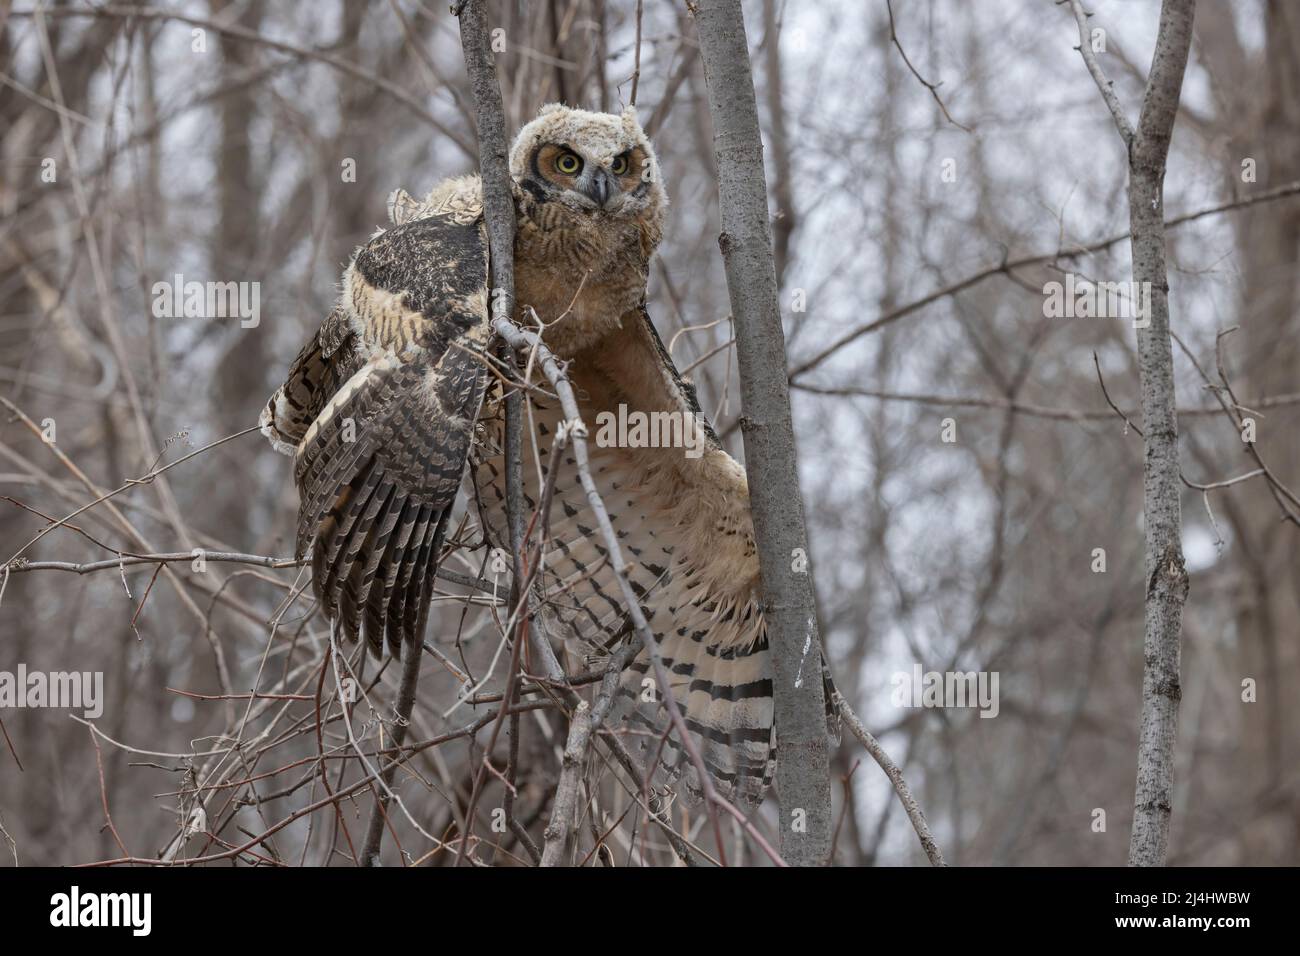 Great Horned Owl (Bubo virginianus), owlet suffering from Highly Pathogenic Avian Influenza (HPAI). This owlet was euthanized along with a sibling. Stock Photo